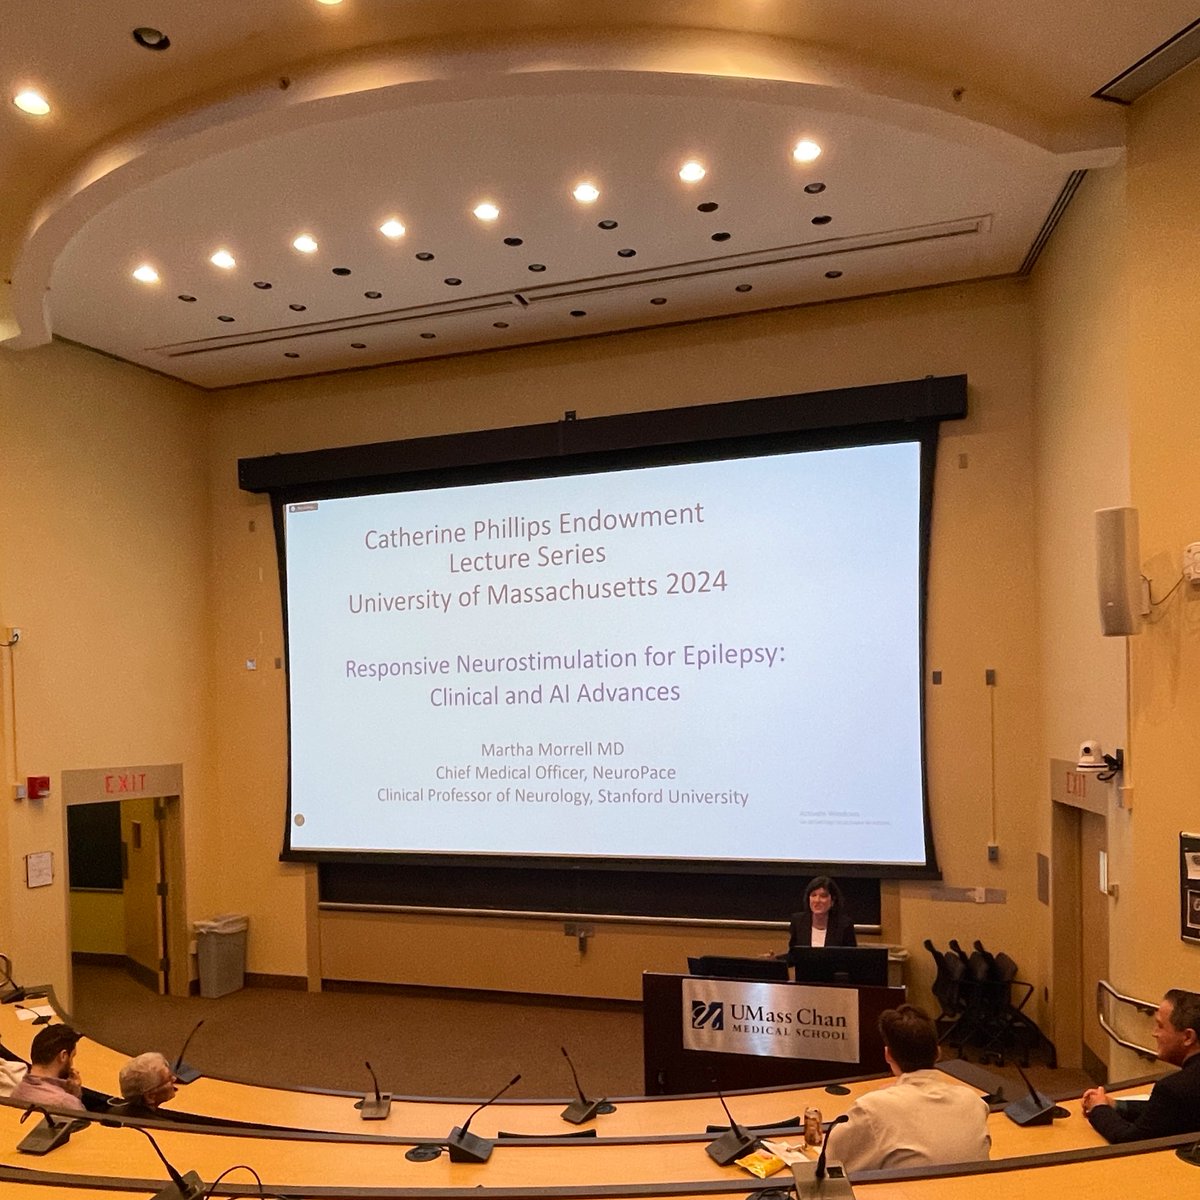 Excellent talk by Dr. Martha Morrell from Stanford University on clinical and #AI advances in responsive neurostimulation for #Epilepsy at UMass Neurology Grand Rounds! 🧠 #Neurotwitter #MedEd #Neurology #UMass